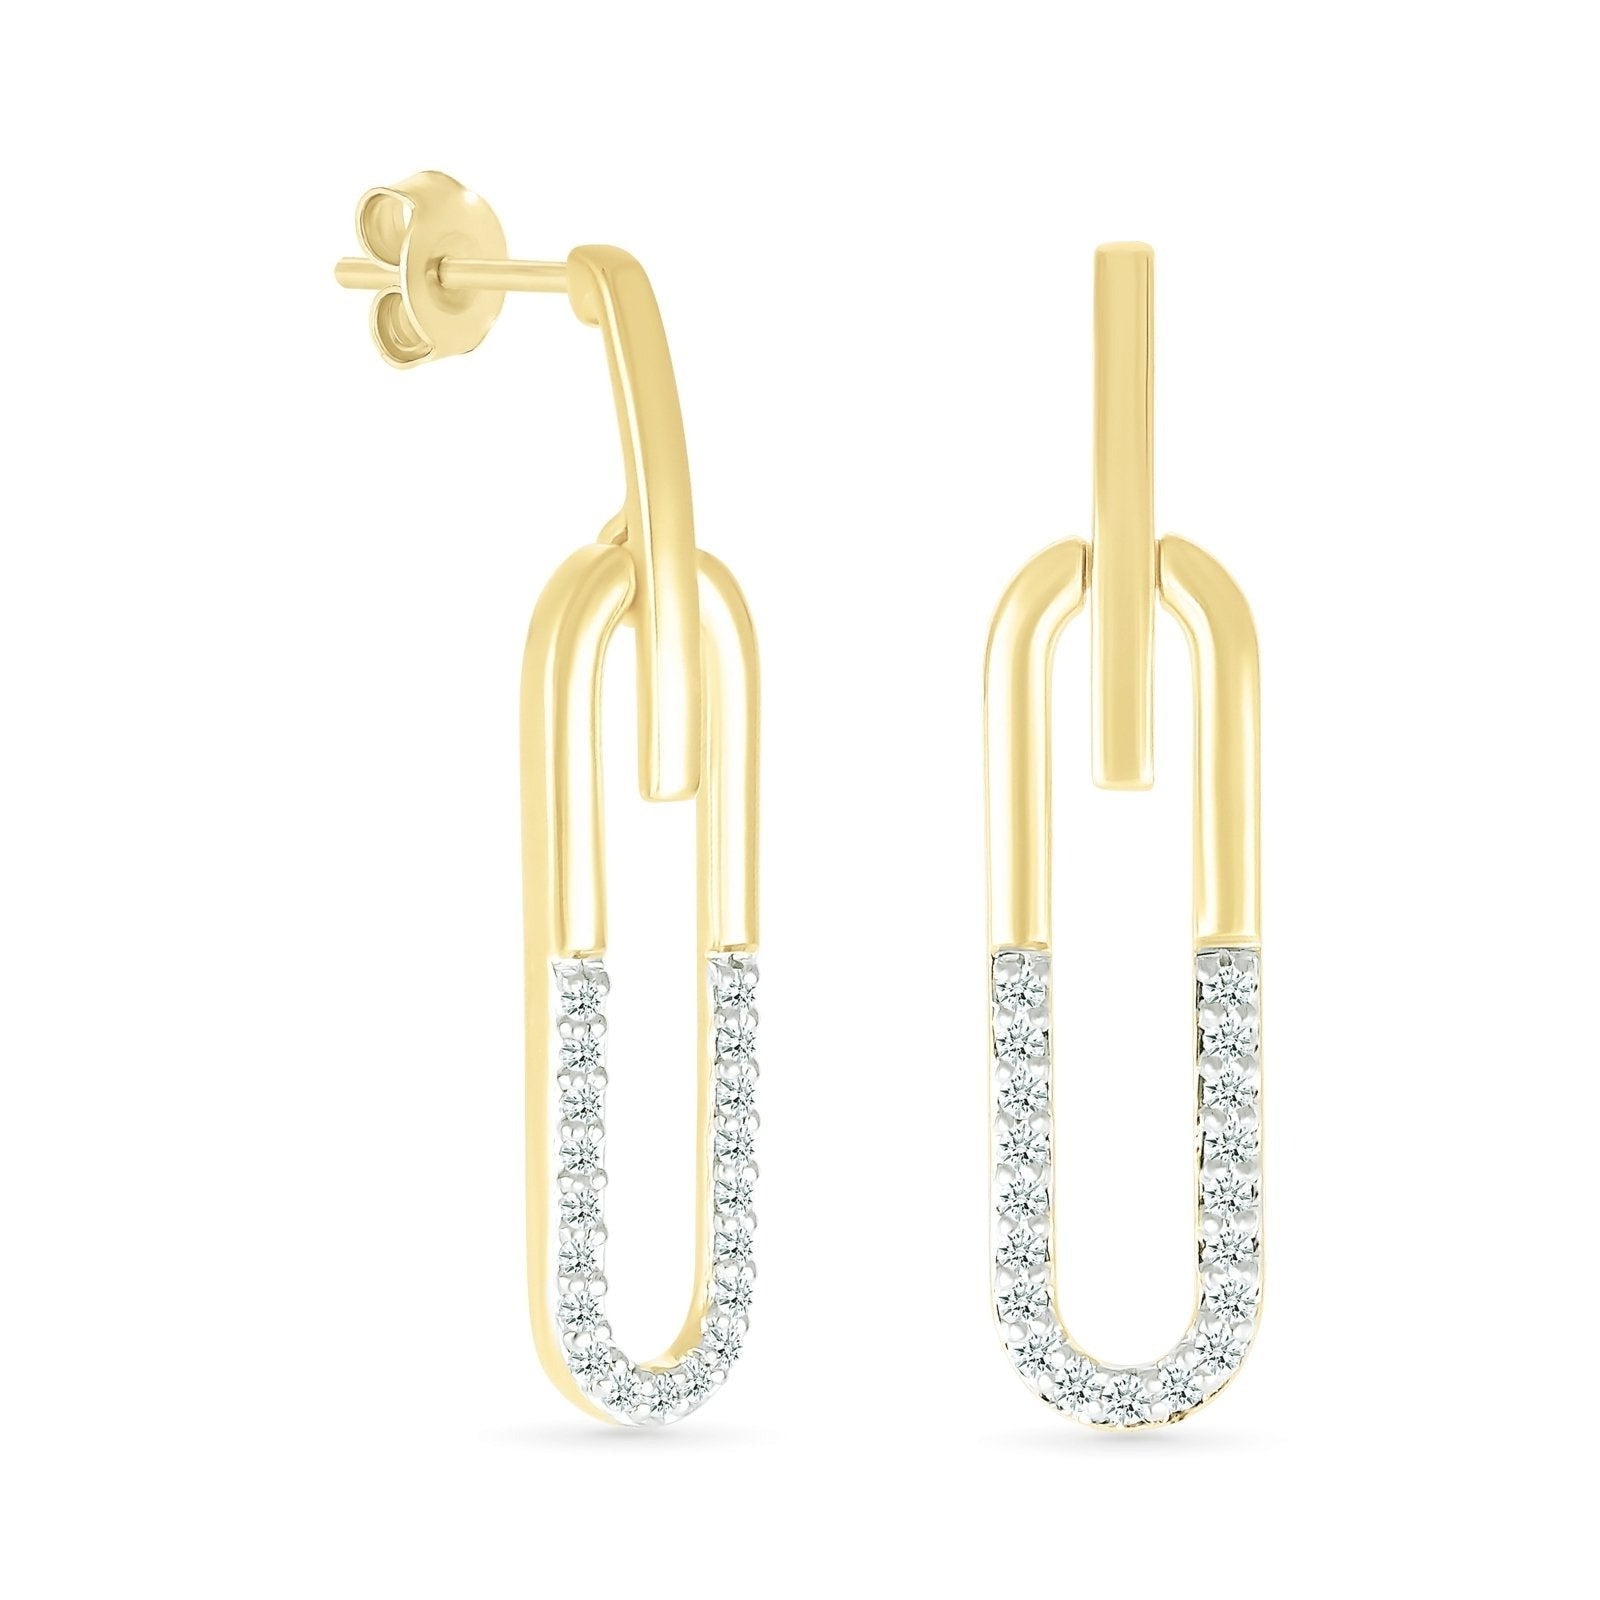 Dangling Paperclip Diamond Stud Earrings Earrings Estella Collection #product_description# 32665 Diamond Made to Order New Arrivals #tag4# #tag5# #tag6# #tag7# #tag8# #tag9# #tag10#